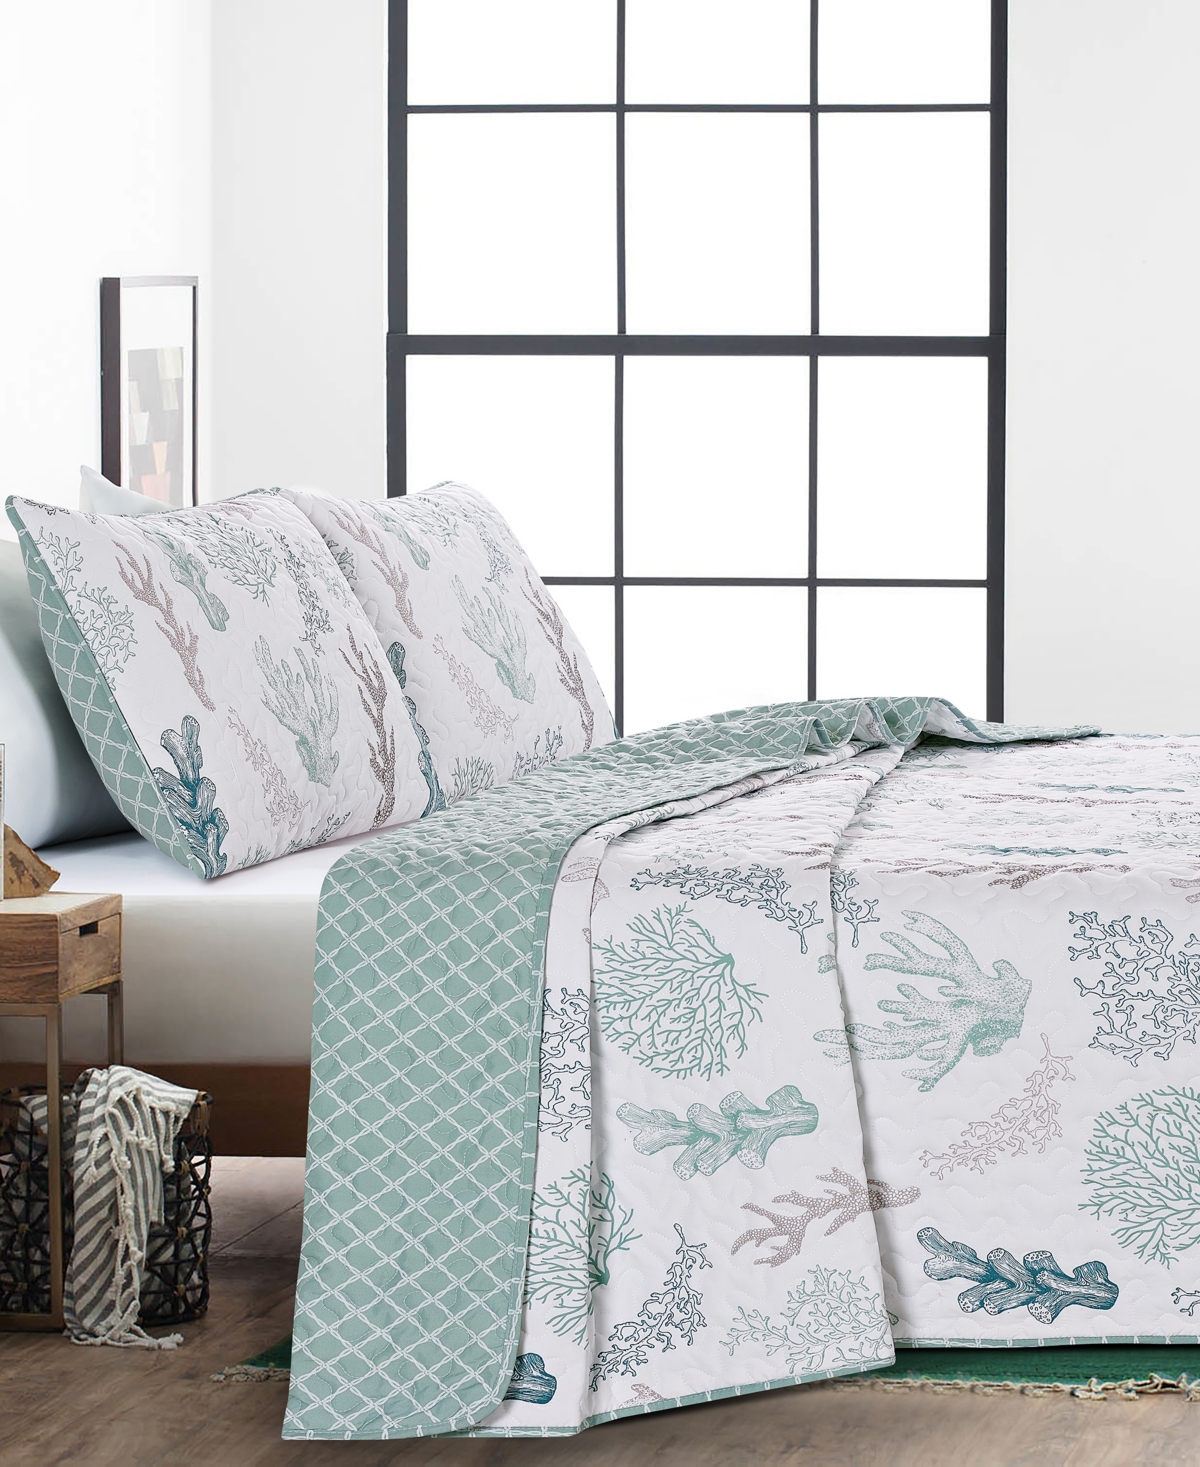 Videri Home Coral Collection 3 Piece Quilt Set, Full/queen In Green Multi